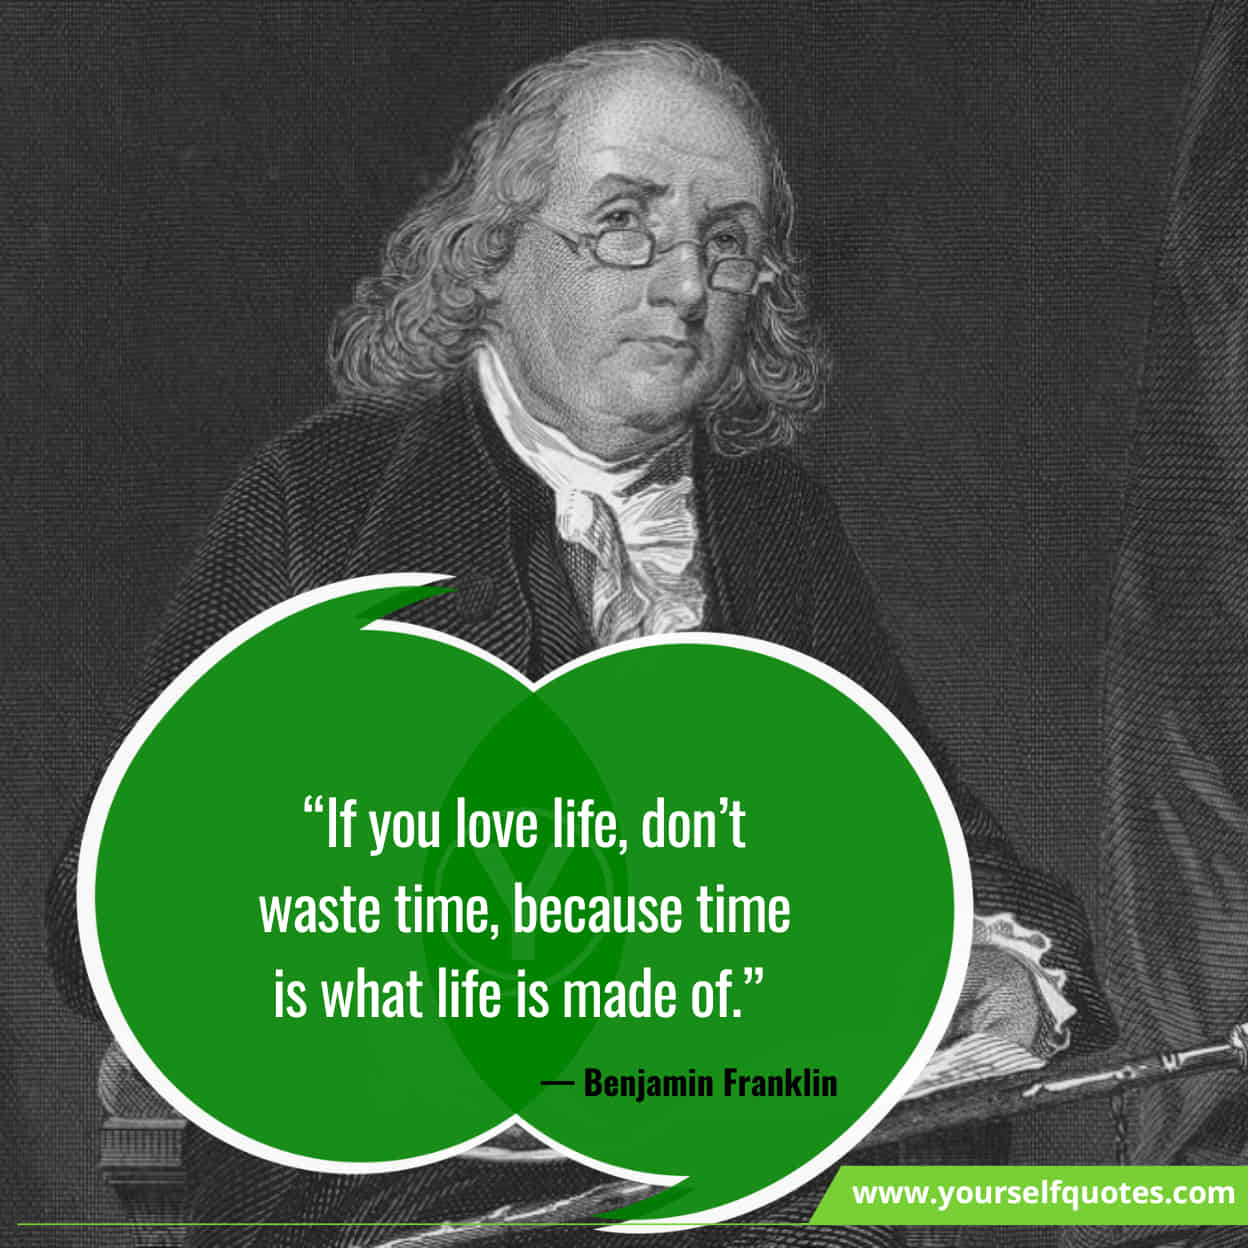 Best Benjamin Franklin Quotes For Life